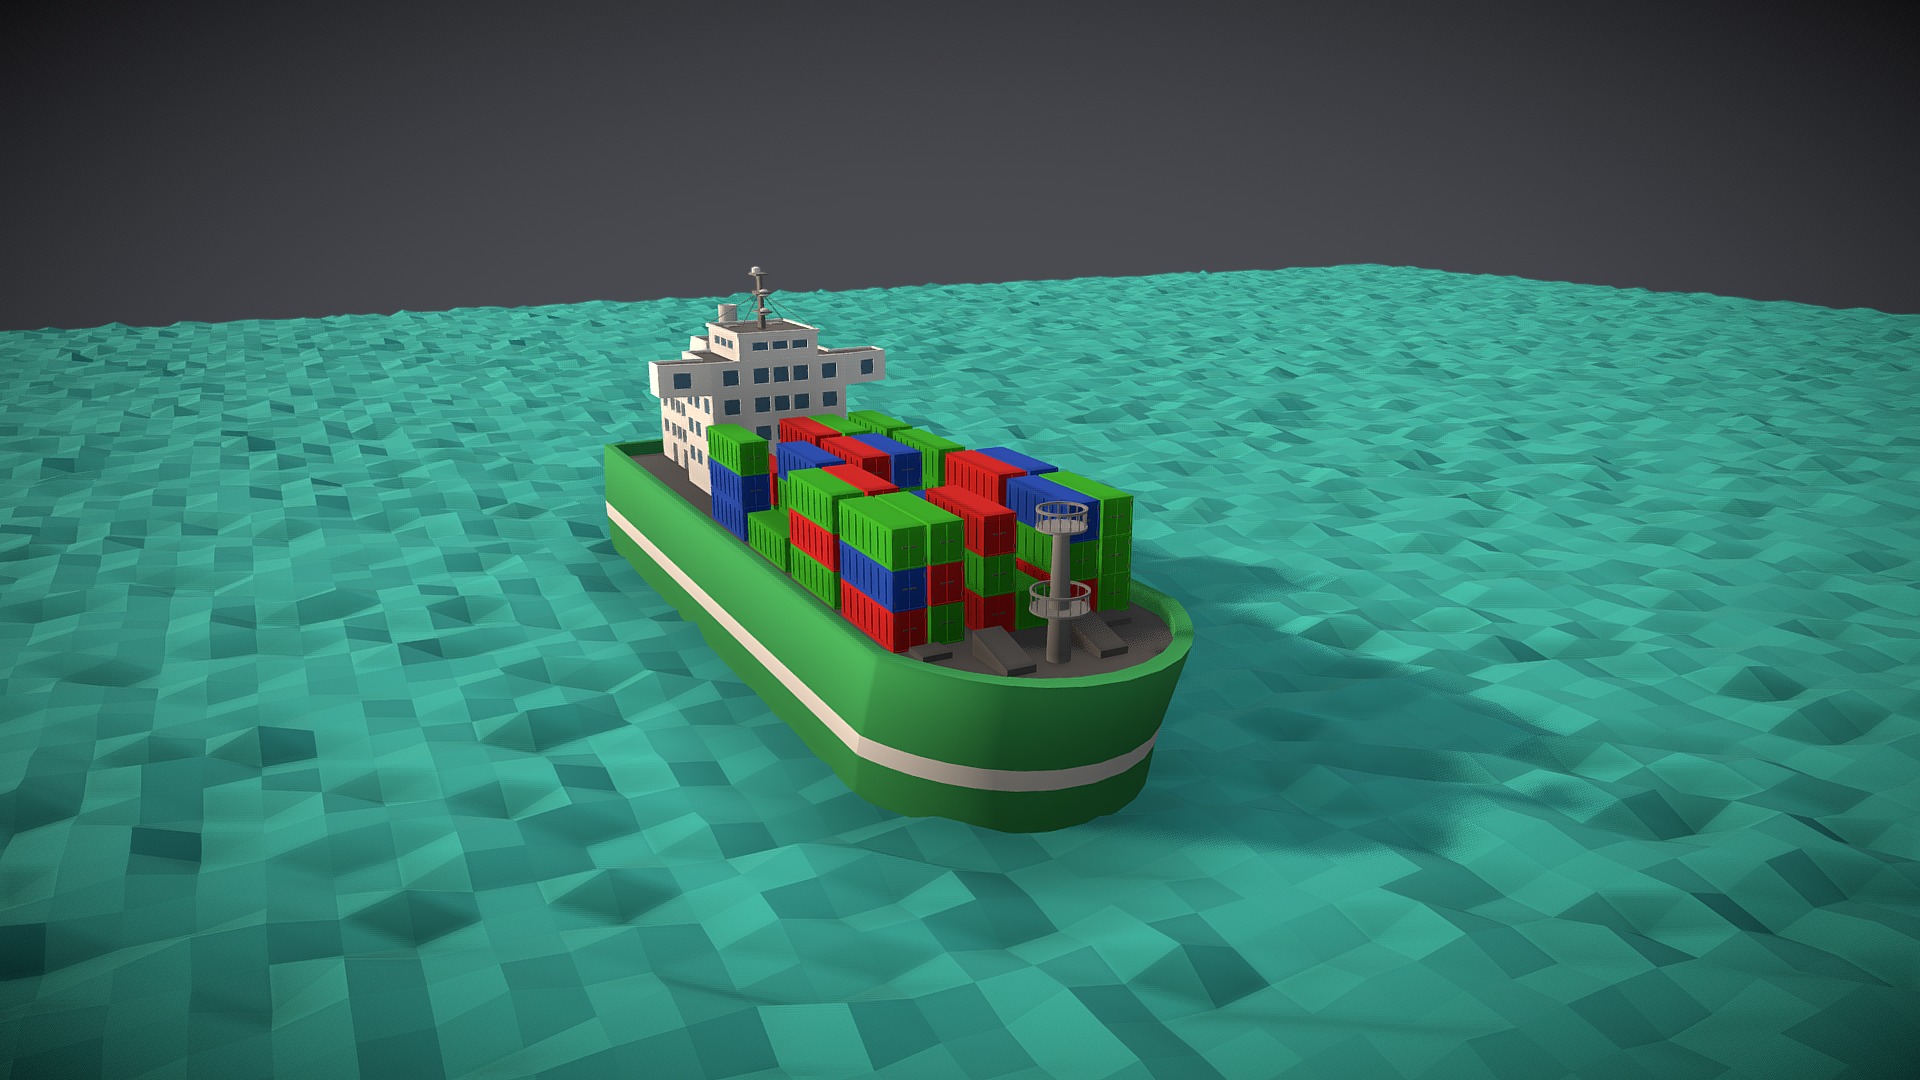 3D model Low-Poly Loaded Cargo Boat - This is a 3D model of the Low-Poly Loaded Cargo Boat. The 3D model is about a ship in the ocean.